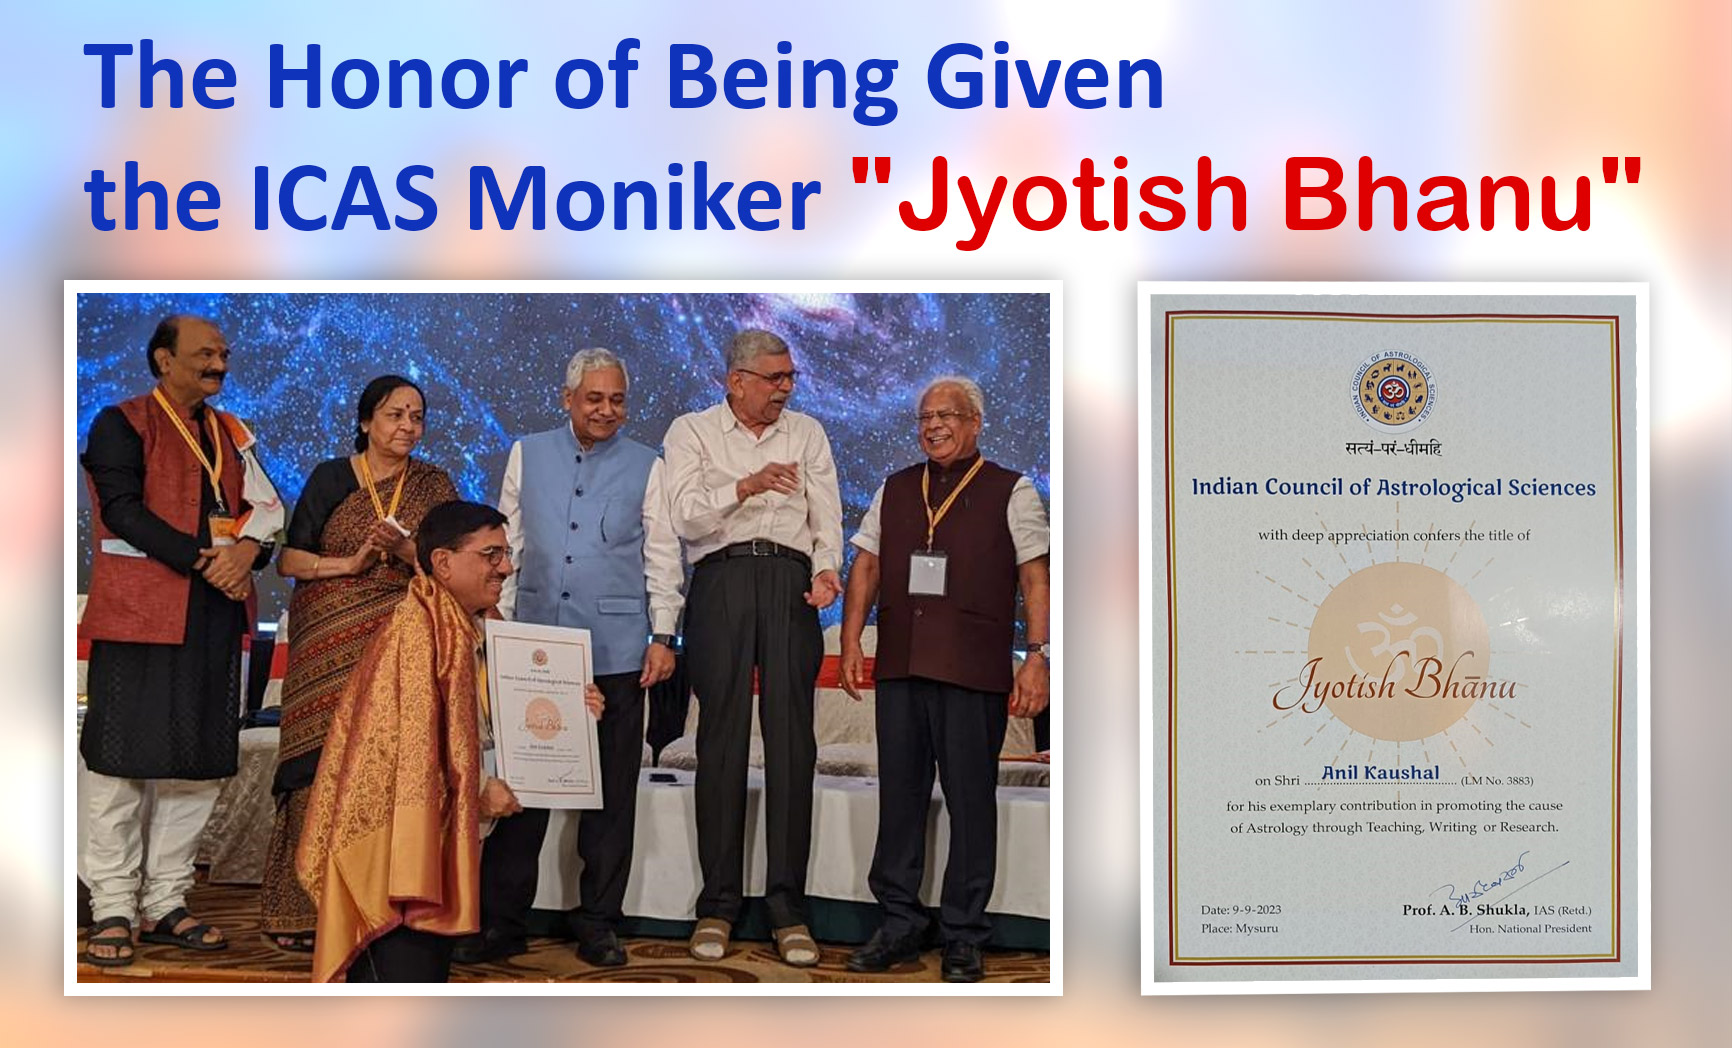 The Honor of Being Given the ICAS Moniker “Jyotish Bhanu”